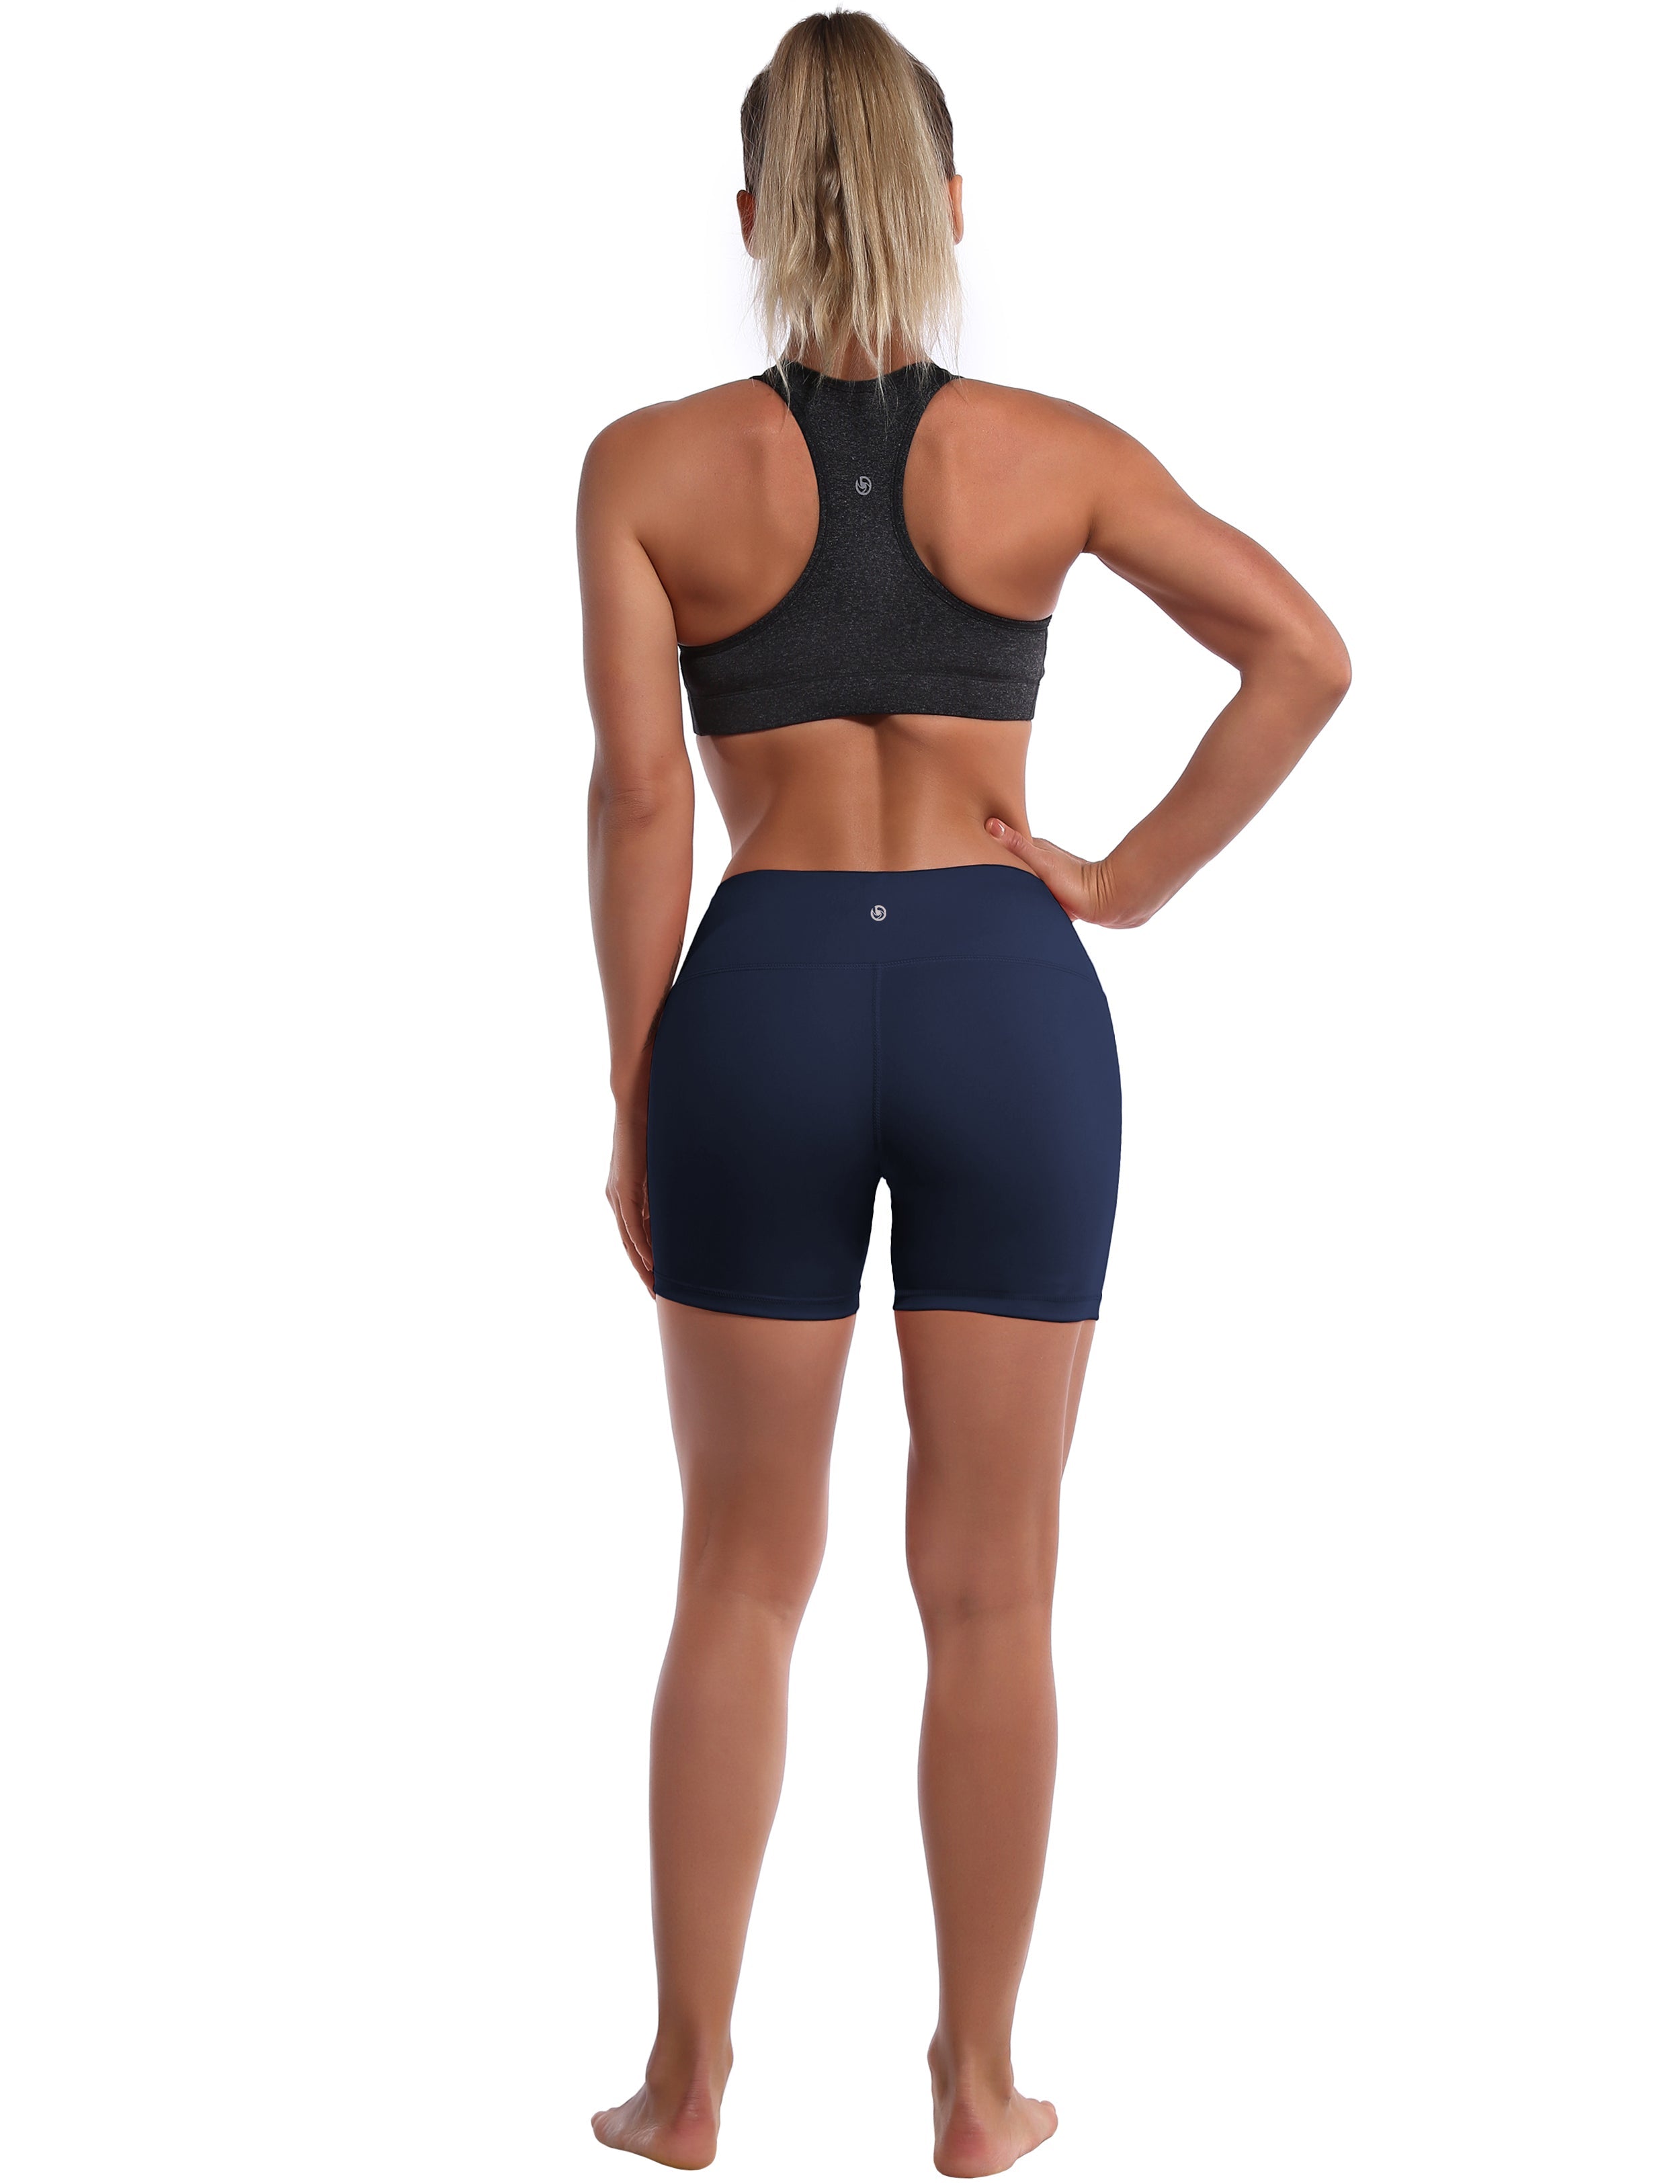 4" Pilates Shorts darknavy Sleek, soft, smooth and totally comfortable: our newest style is here. Softest-ever fabric High elasticity High density 4-way stretch Fabric doesn't attract lint easily No see-through Moisture-wicking Machine wash 75% Nylon, 25% Spandex